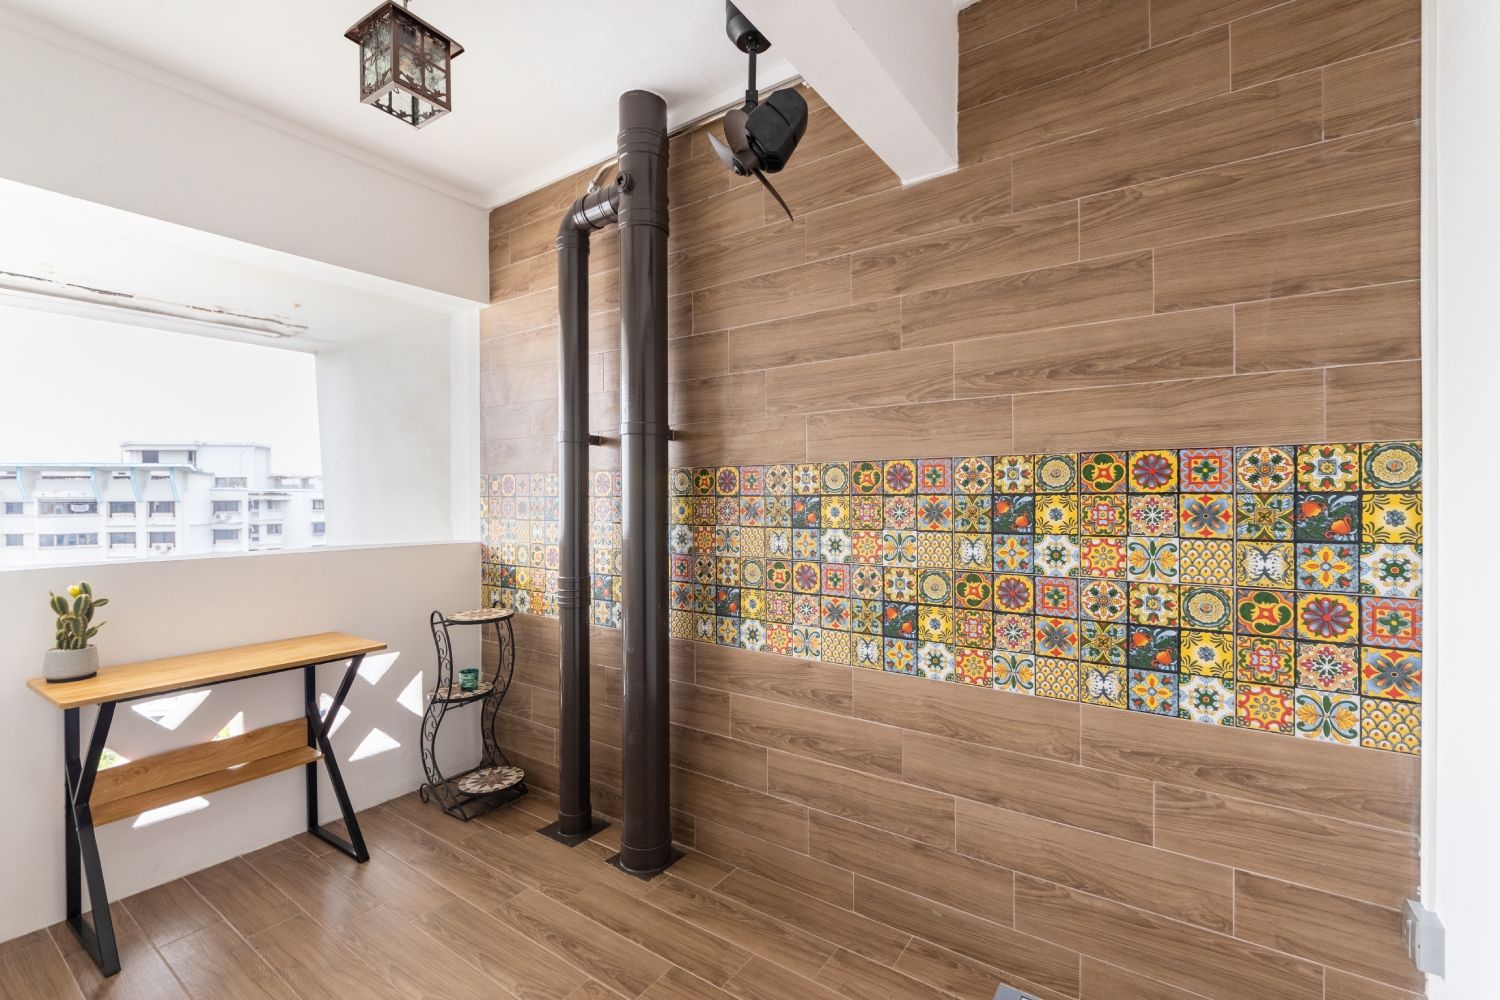 Scandinavian Wall Design With Wooden Panel And Mosaic Tiles